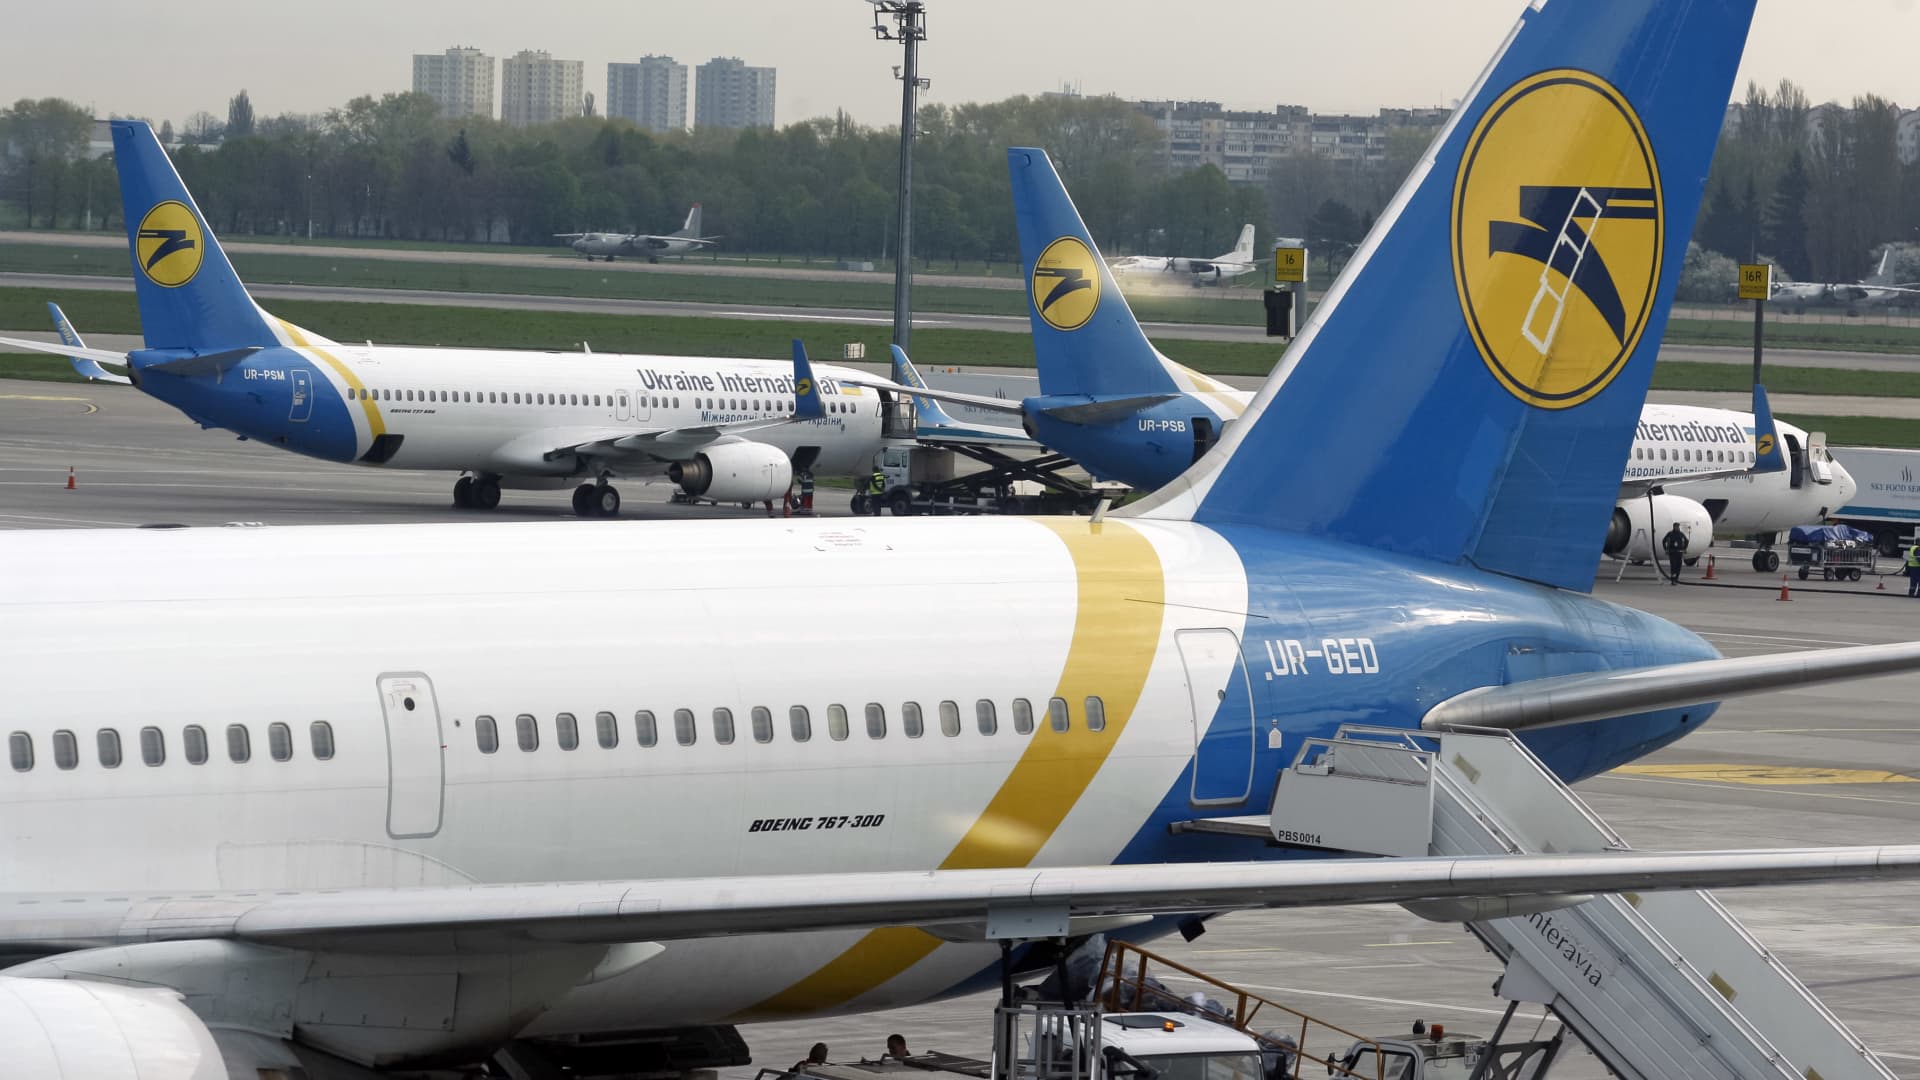 Aircrafts of the UIA (Ukraine International Airlines) airline is seen on the apron of Boryspil International airport near Kiev, Ukraine, 25 April, 2018.